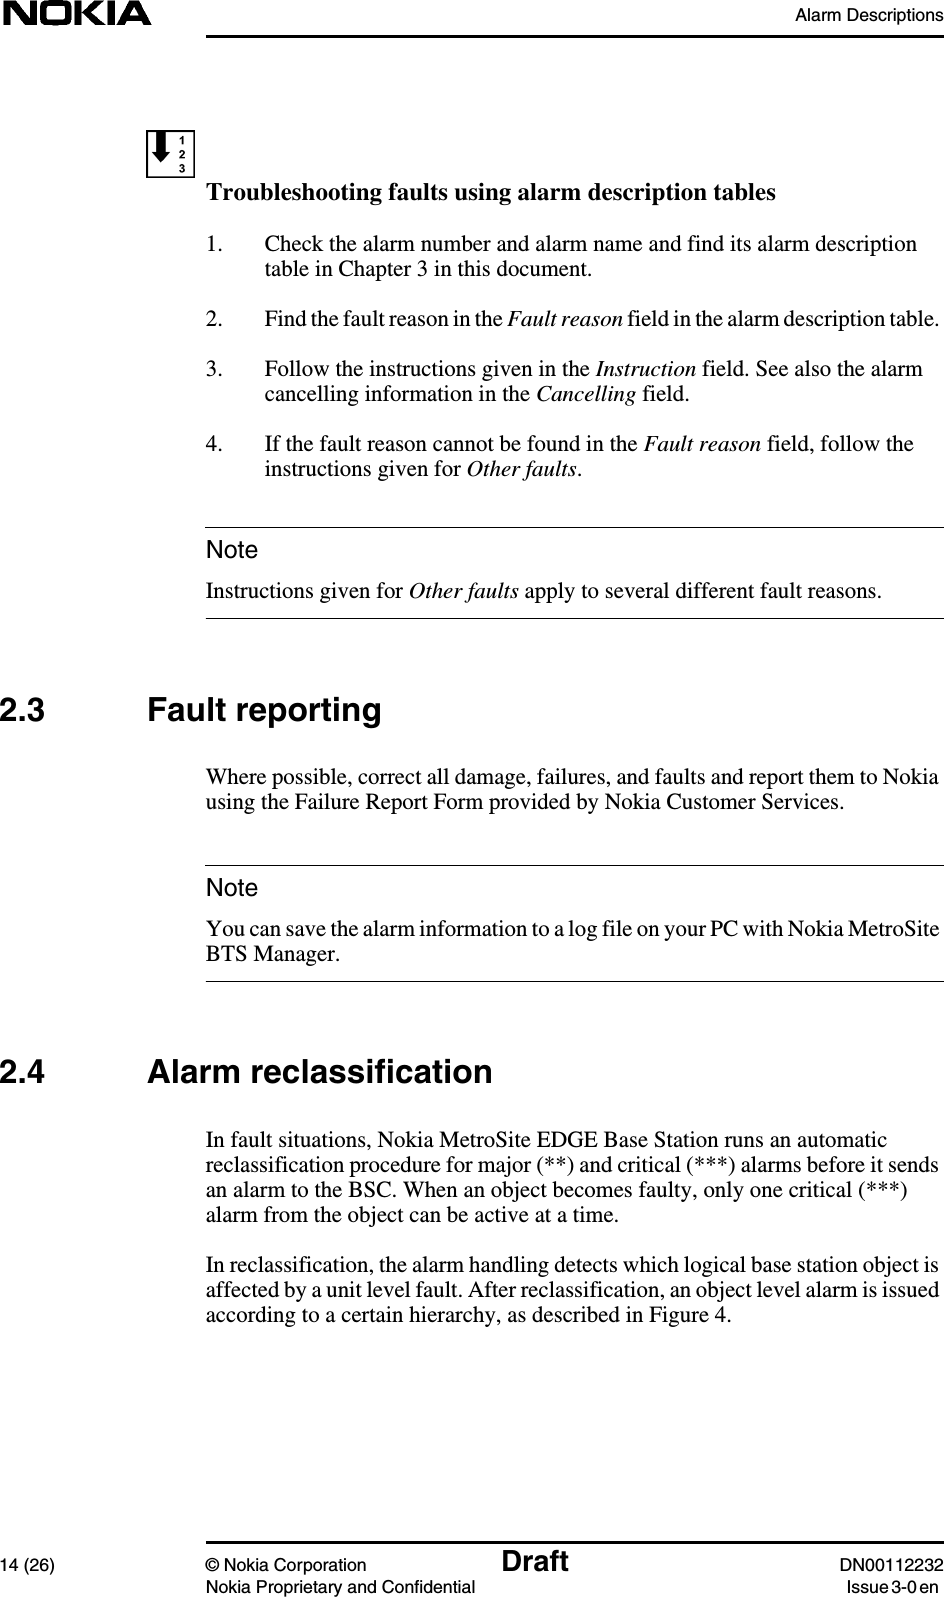 Alarm Descriptions14 (26) © Nokia Corporation Draft DN00112232Nokia Proprietary and Confidential Issue 3-0 enNoteNoteTroubleshooting faults using alarm description tables1. Check the alarm number and alarm name and find its alarm descriptiontable in Chapter 3 in this document.2. Find the fault reason in the Fault reason field in the alarm description table.3. Follow the instructions given in the Instruction field. See also the alarmcancelling information in the Cancelling field.4. If the fault reason cannot be found in the Fault reason field, follow theinstructions given for Other faults.Instructions given for Other faults apply to several different fault reasons.2.3 Fault reportingWhere possible, correct all damage, failures, and faults and report them to Nokiausing the Failure Report Form provided by Nokia Customer Services.You can save the alarm information to a log file on your PC with Nokia MetroSiteBTS Manager.2.4 Alarm reclassificationIn fault situations, Nokia MetroSite EDGE Base Station runs an automaticreclassification procedure for major (**) and critical (***) alarms before it sendsan alarm to the BSC. When an object becomes faulty, only one critical (***)alarm from the object can be active at a time.In reclassification, the alarm handling detects which logical base station object isaffected by a unit level fault. After reclassification, an object level alarm is issuedaccording to a certain hierarchy, as described in Figure 4.